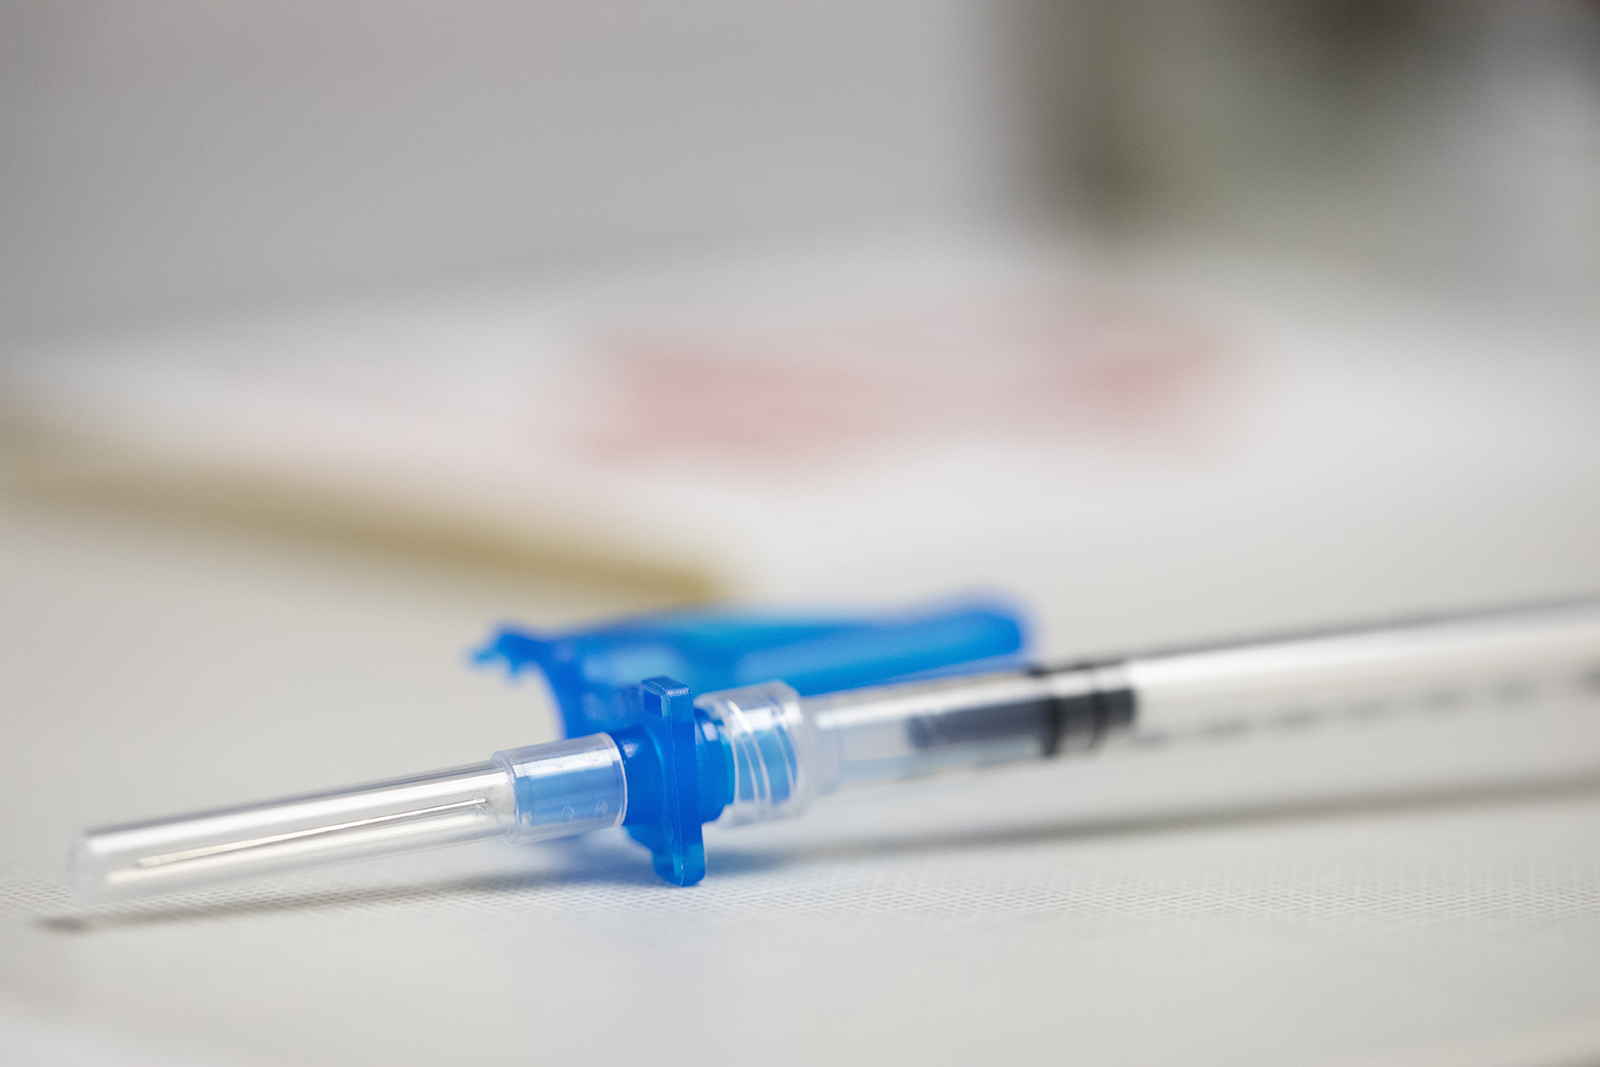 A syringe is prepped for a Moderna COVID-19 booster vaccine at a pharmacy in Portland, Oregon on Monday Dec. 27.